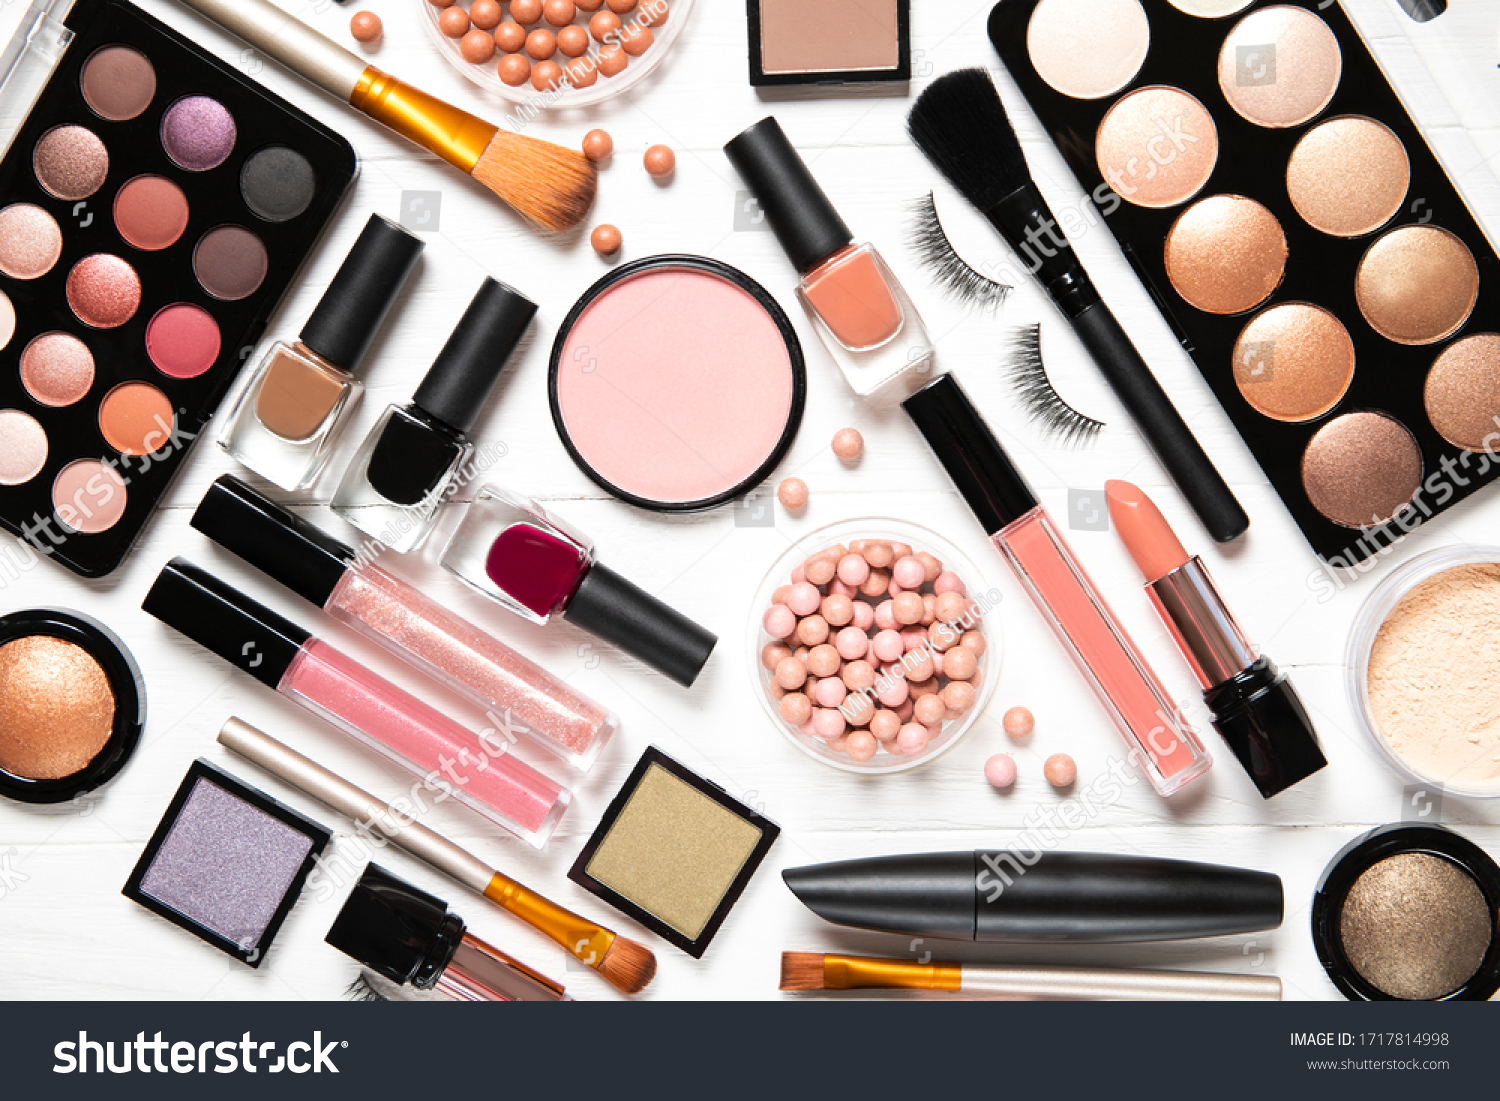 Decorative cosmetics and makeup brushes on a white background, top view #1717814998